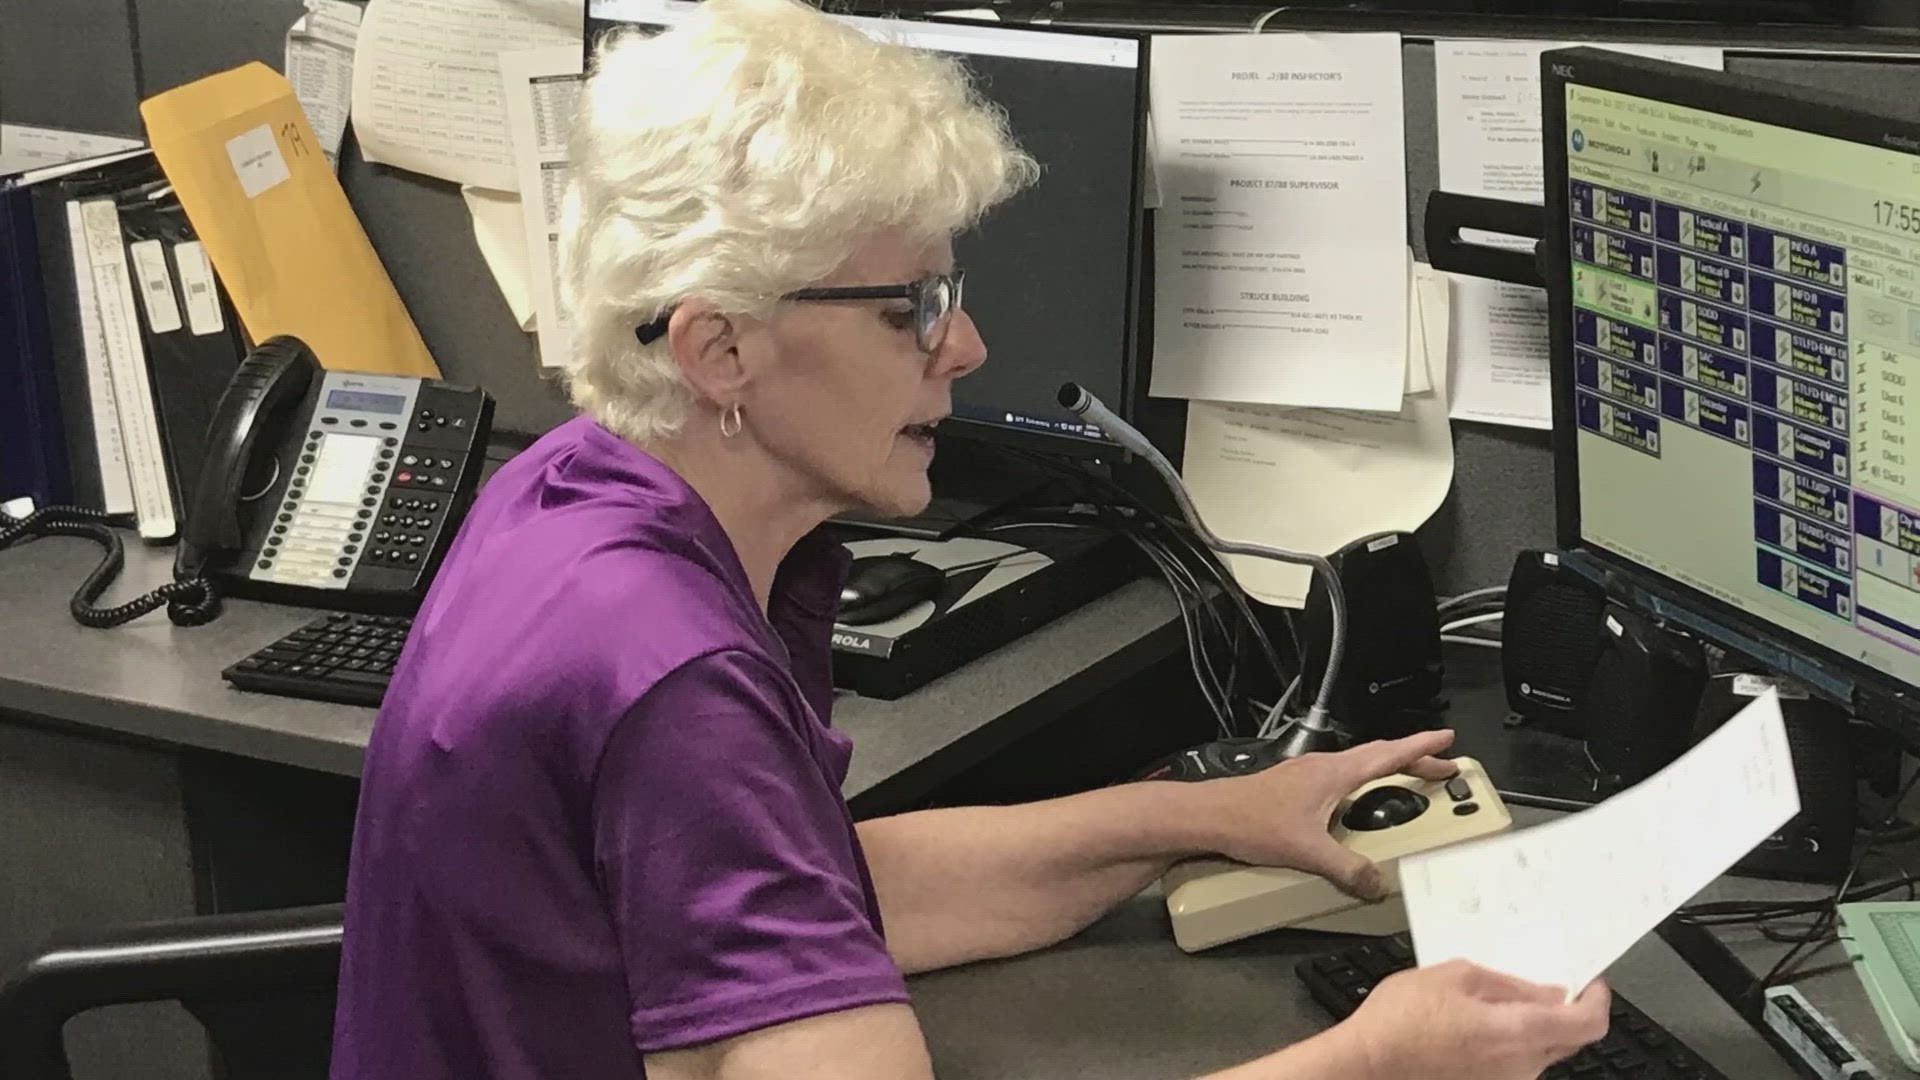 5 On Your Side's Christine Byers talks with a retired St. Louis dispatcher on recent issues with the system. Here's what she had to say.